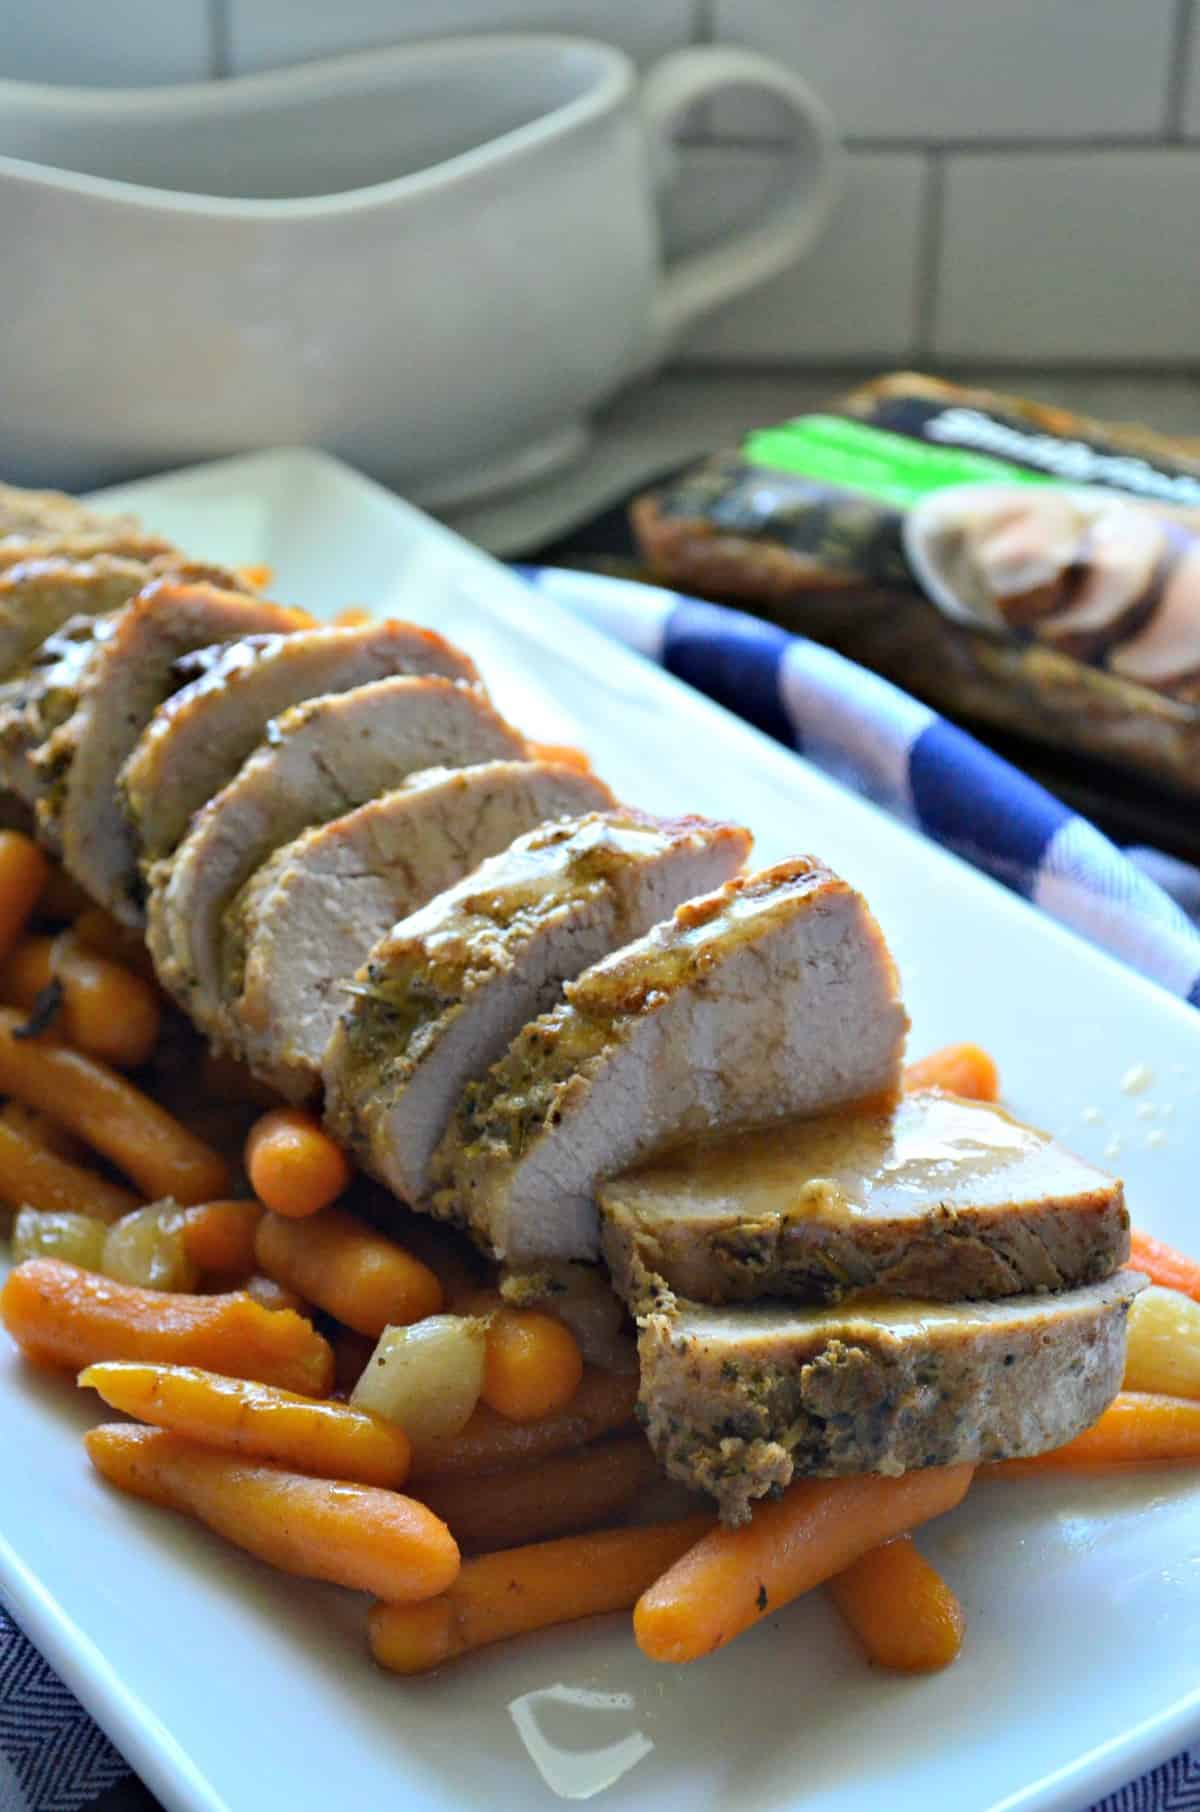 Garlic and Herb Pork Tenderloin with Carrots and Pearl Onions on platter in front of gravy boat.